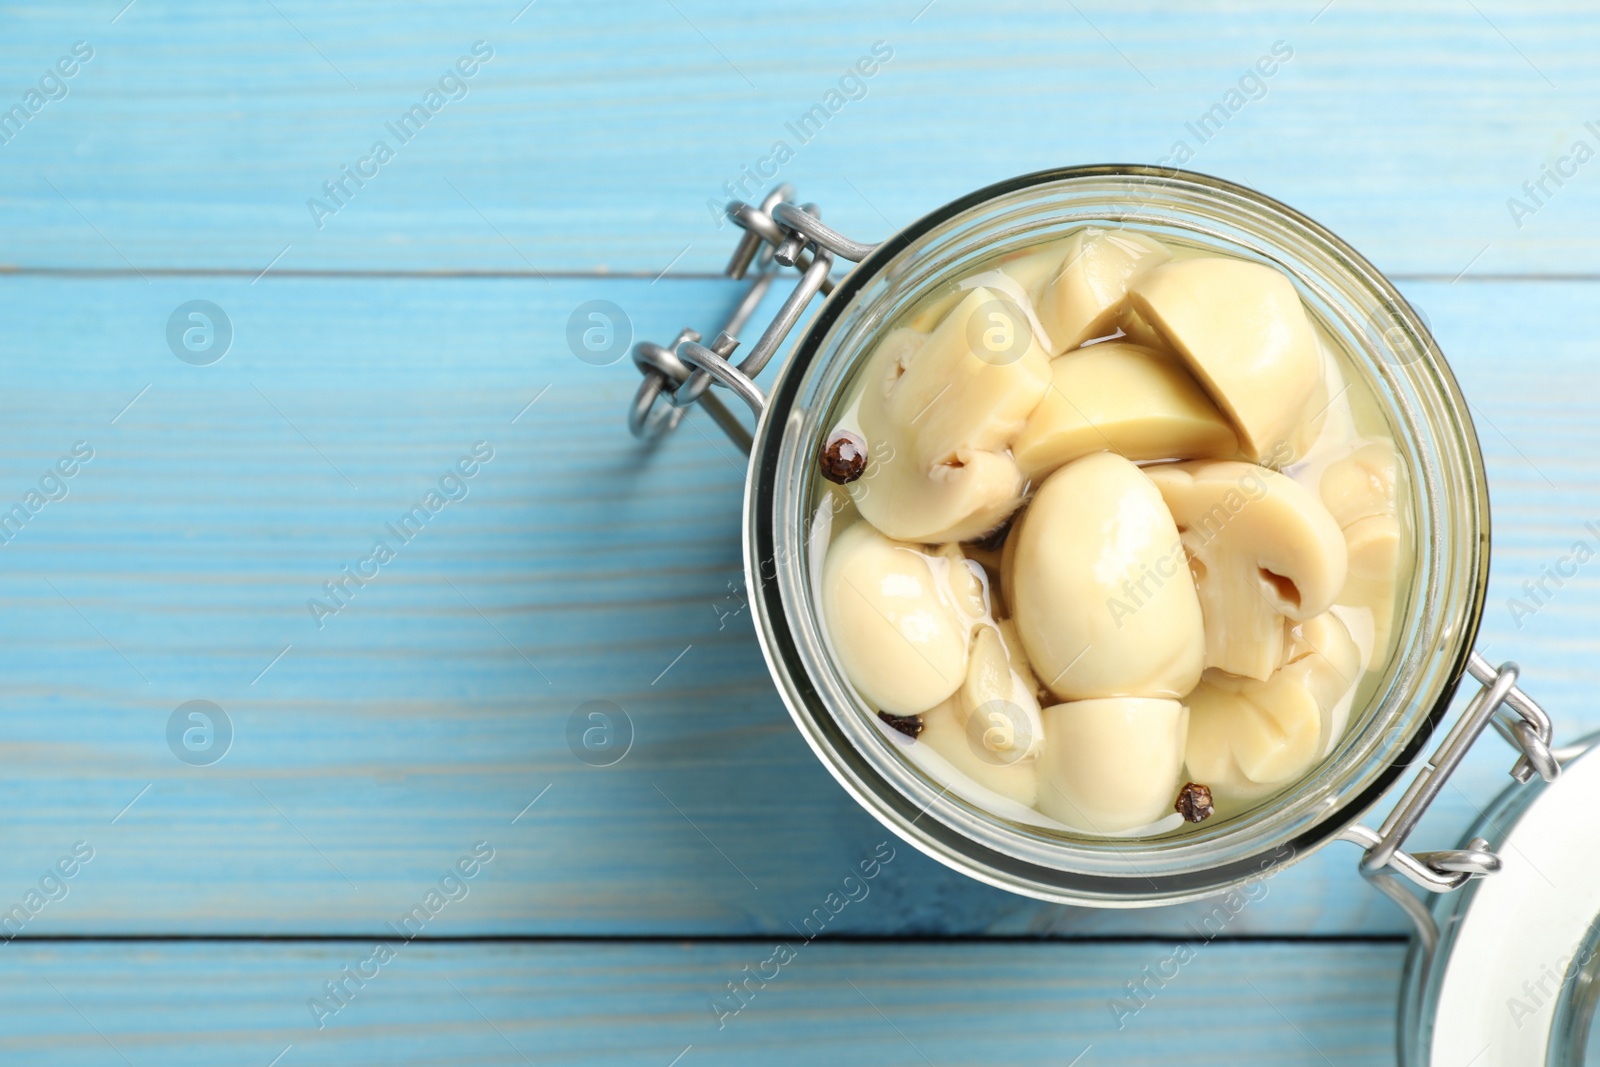 Photo of Delicious marinated mushrooms in glass jar on light blue wooden table, top view